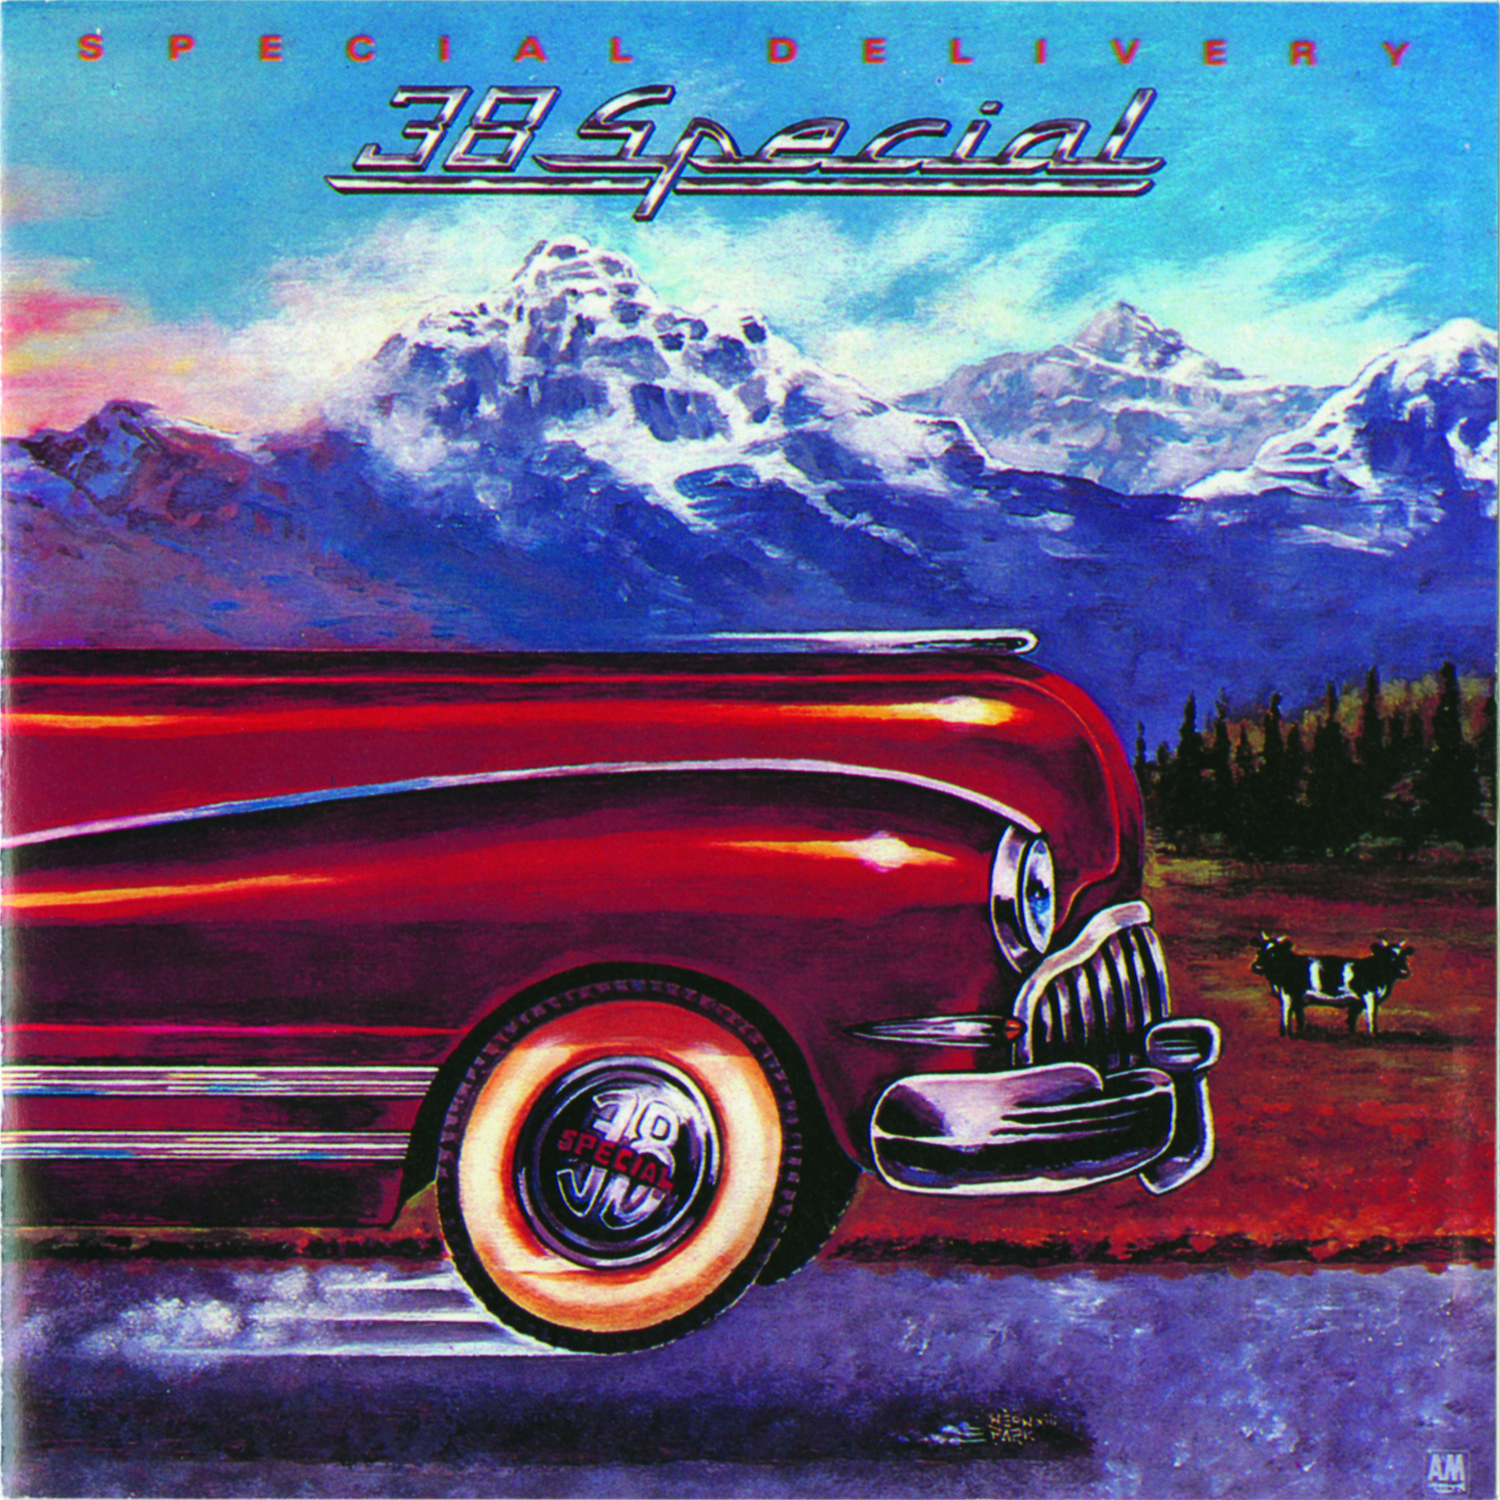 38 Special - I Been A Mover